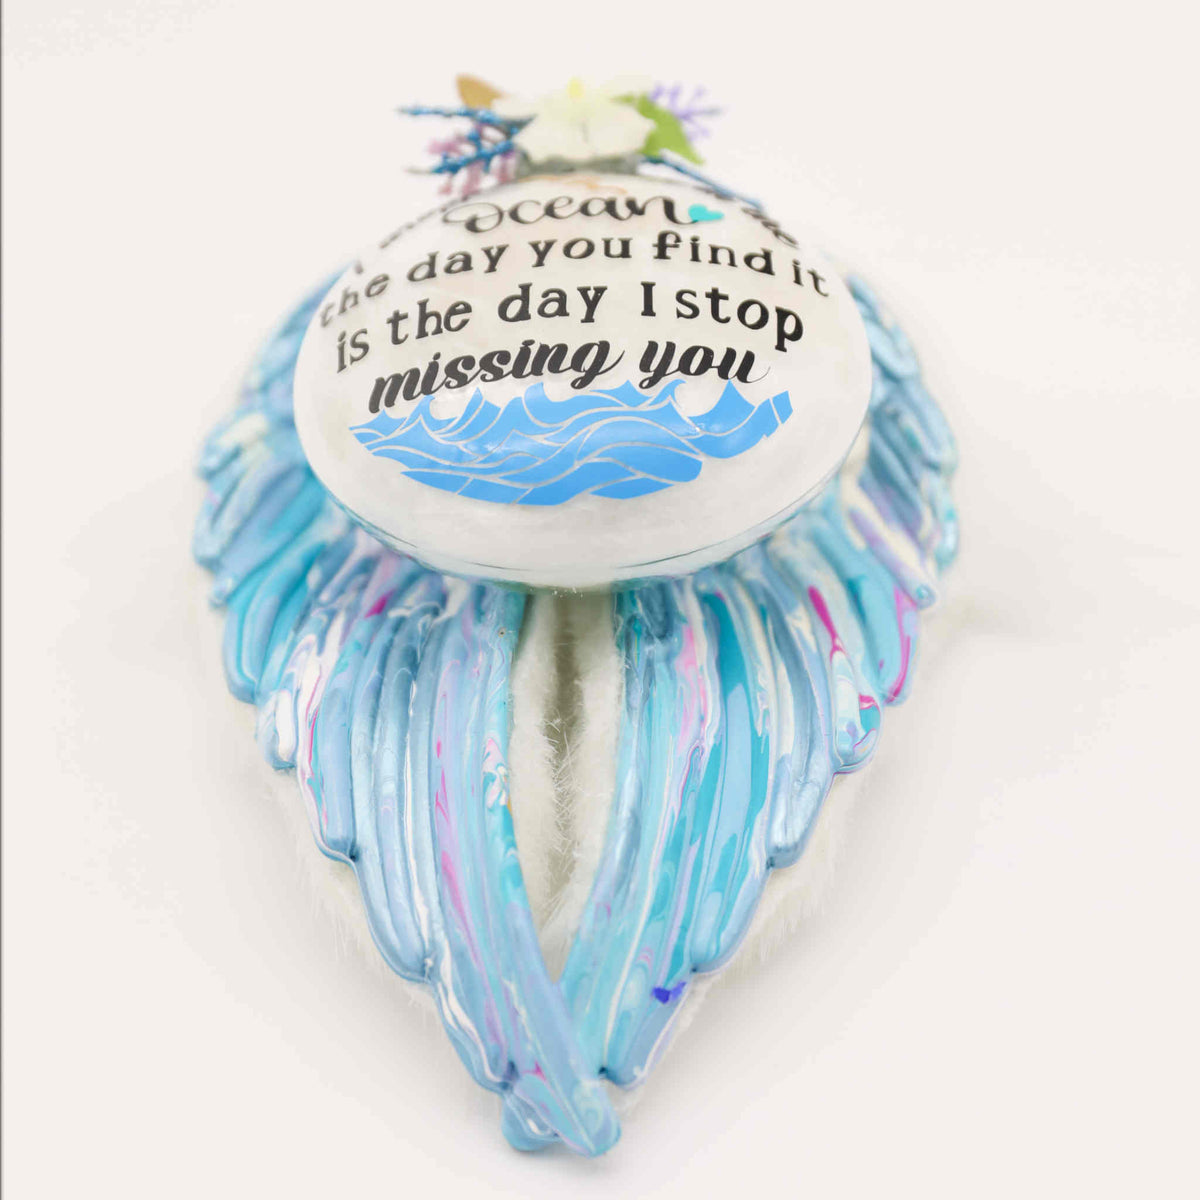 These poured acrylic ornaments are made in a variety of colors with custom verses, and adorned with feathers, fur, charms, flowers, or other decorative elements dependent on your selection.